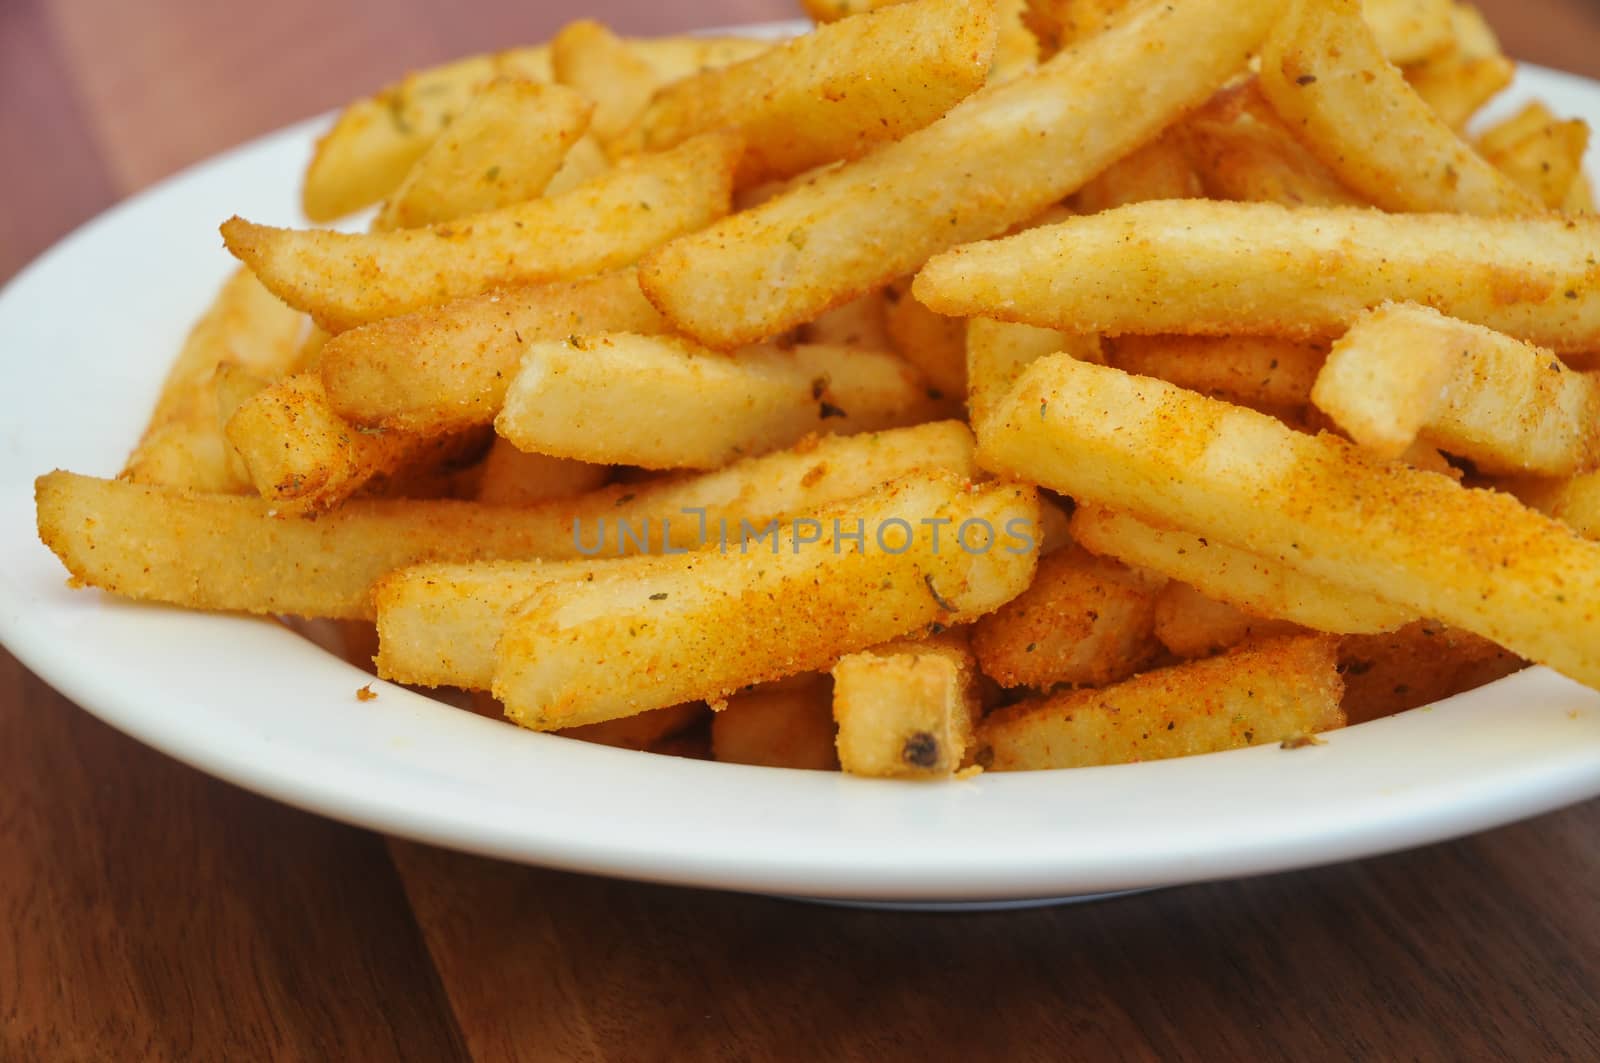 Golden spice french fries by eyeofpaul